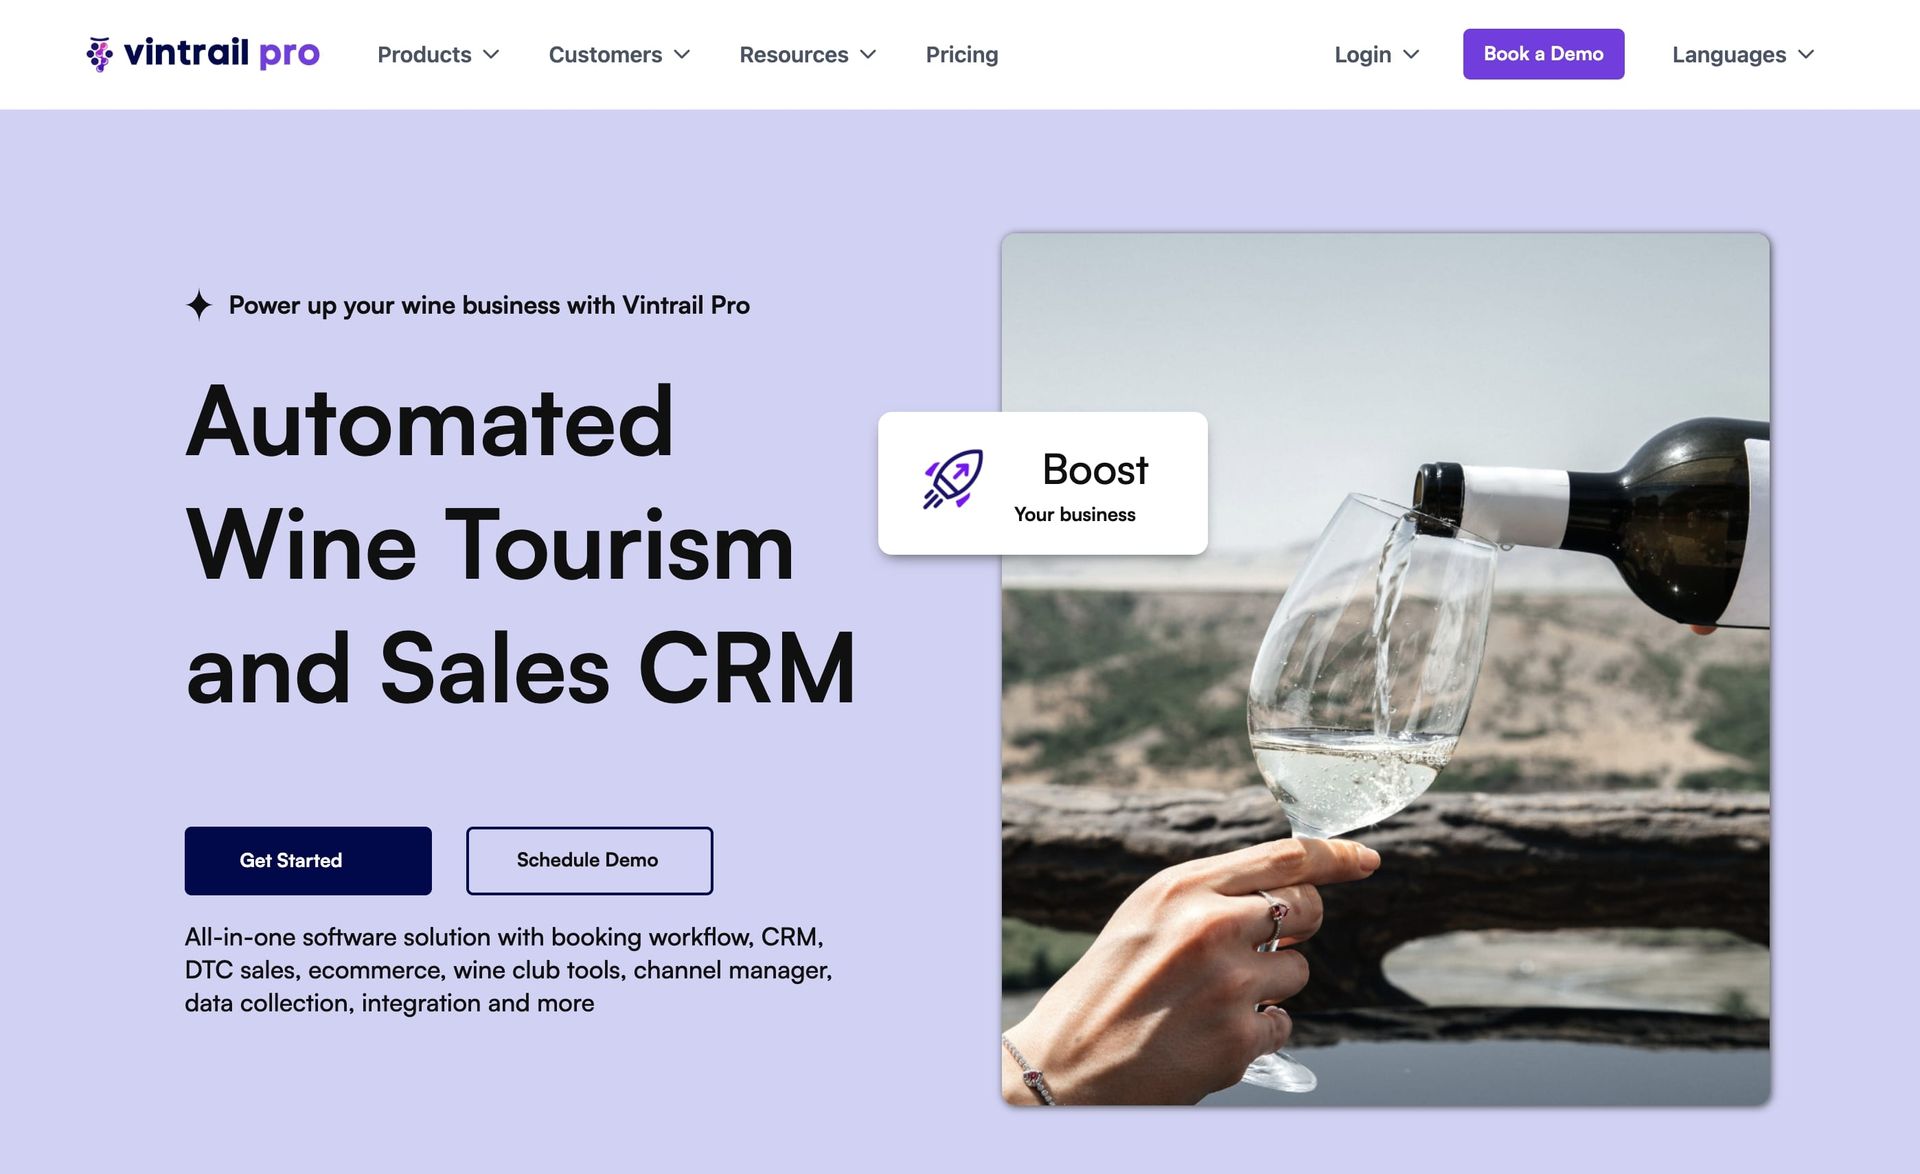 Vintrail Pro homepage: Automated Wine Tourism and Sales CRM